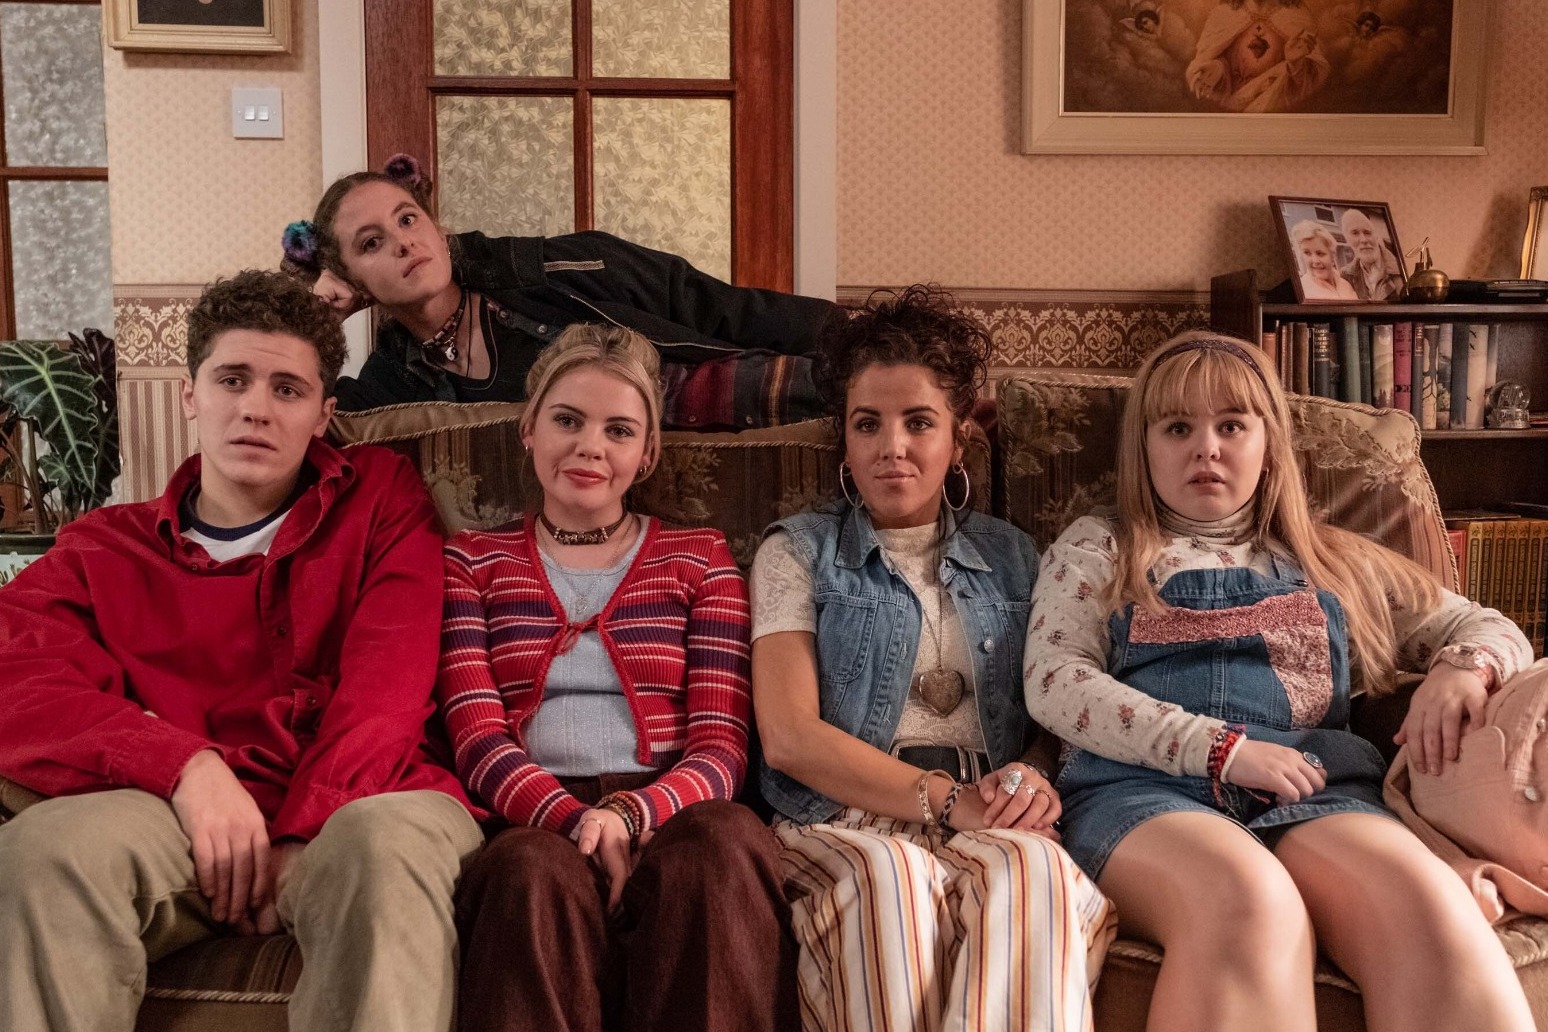 Excitement tinged with sadness at premiere for final series of Derry Girls